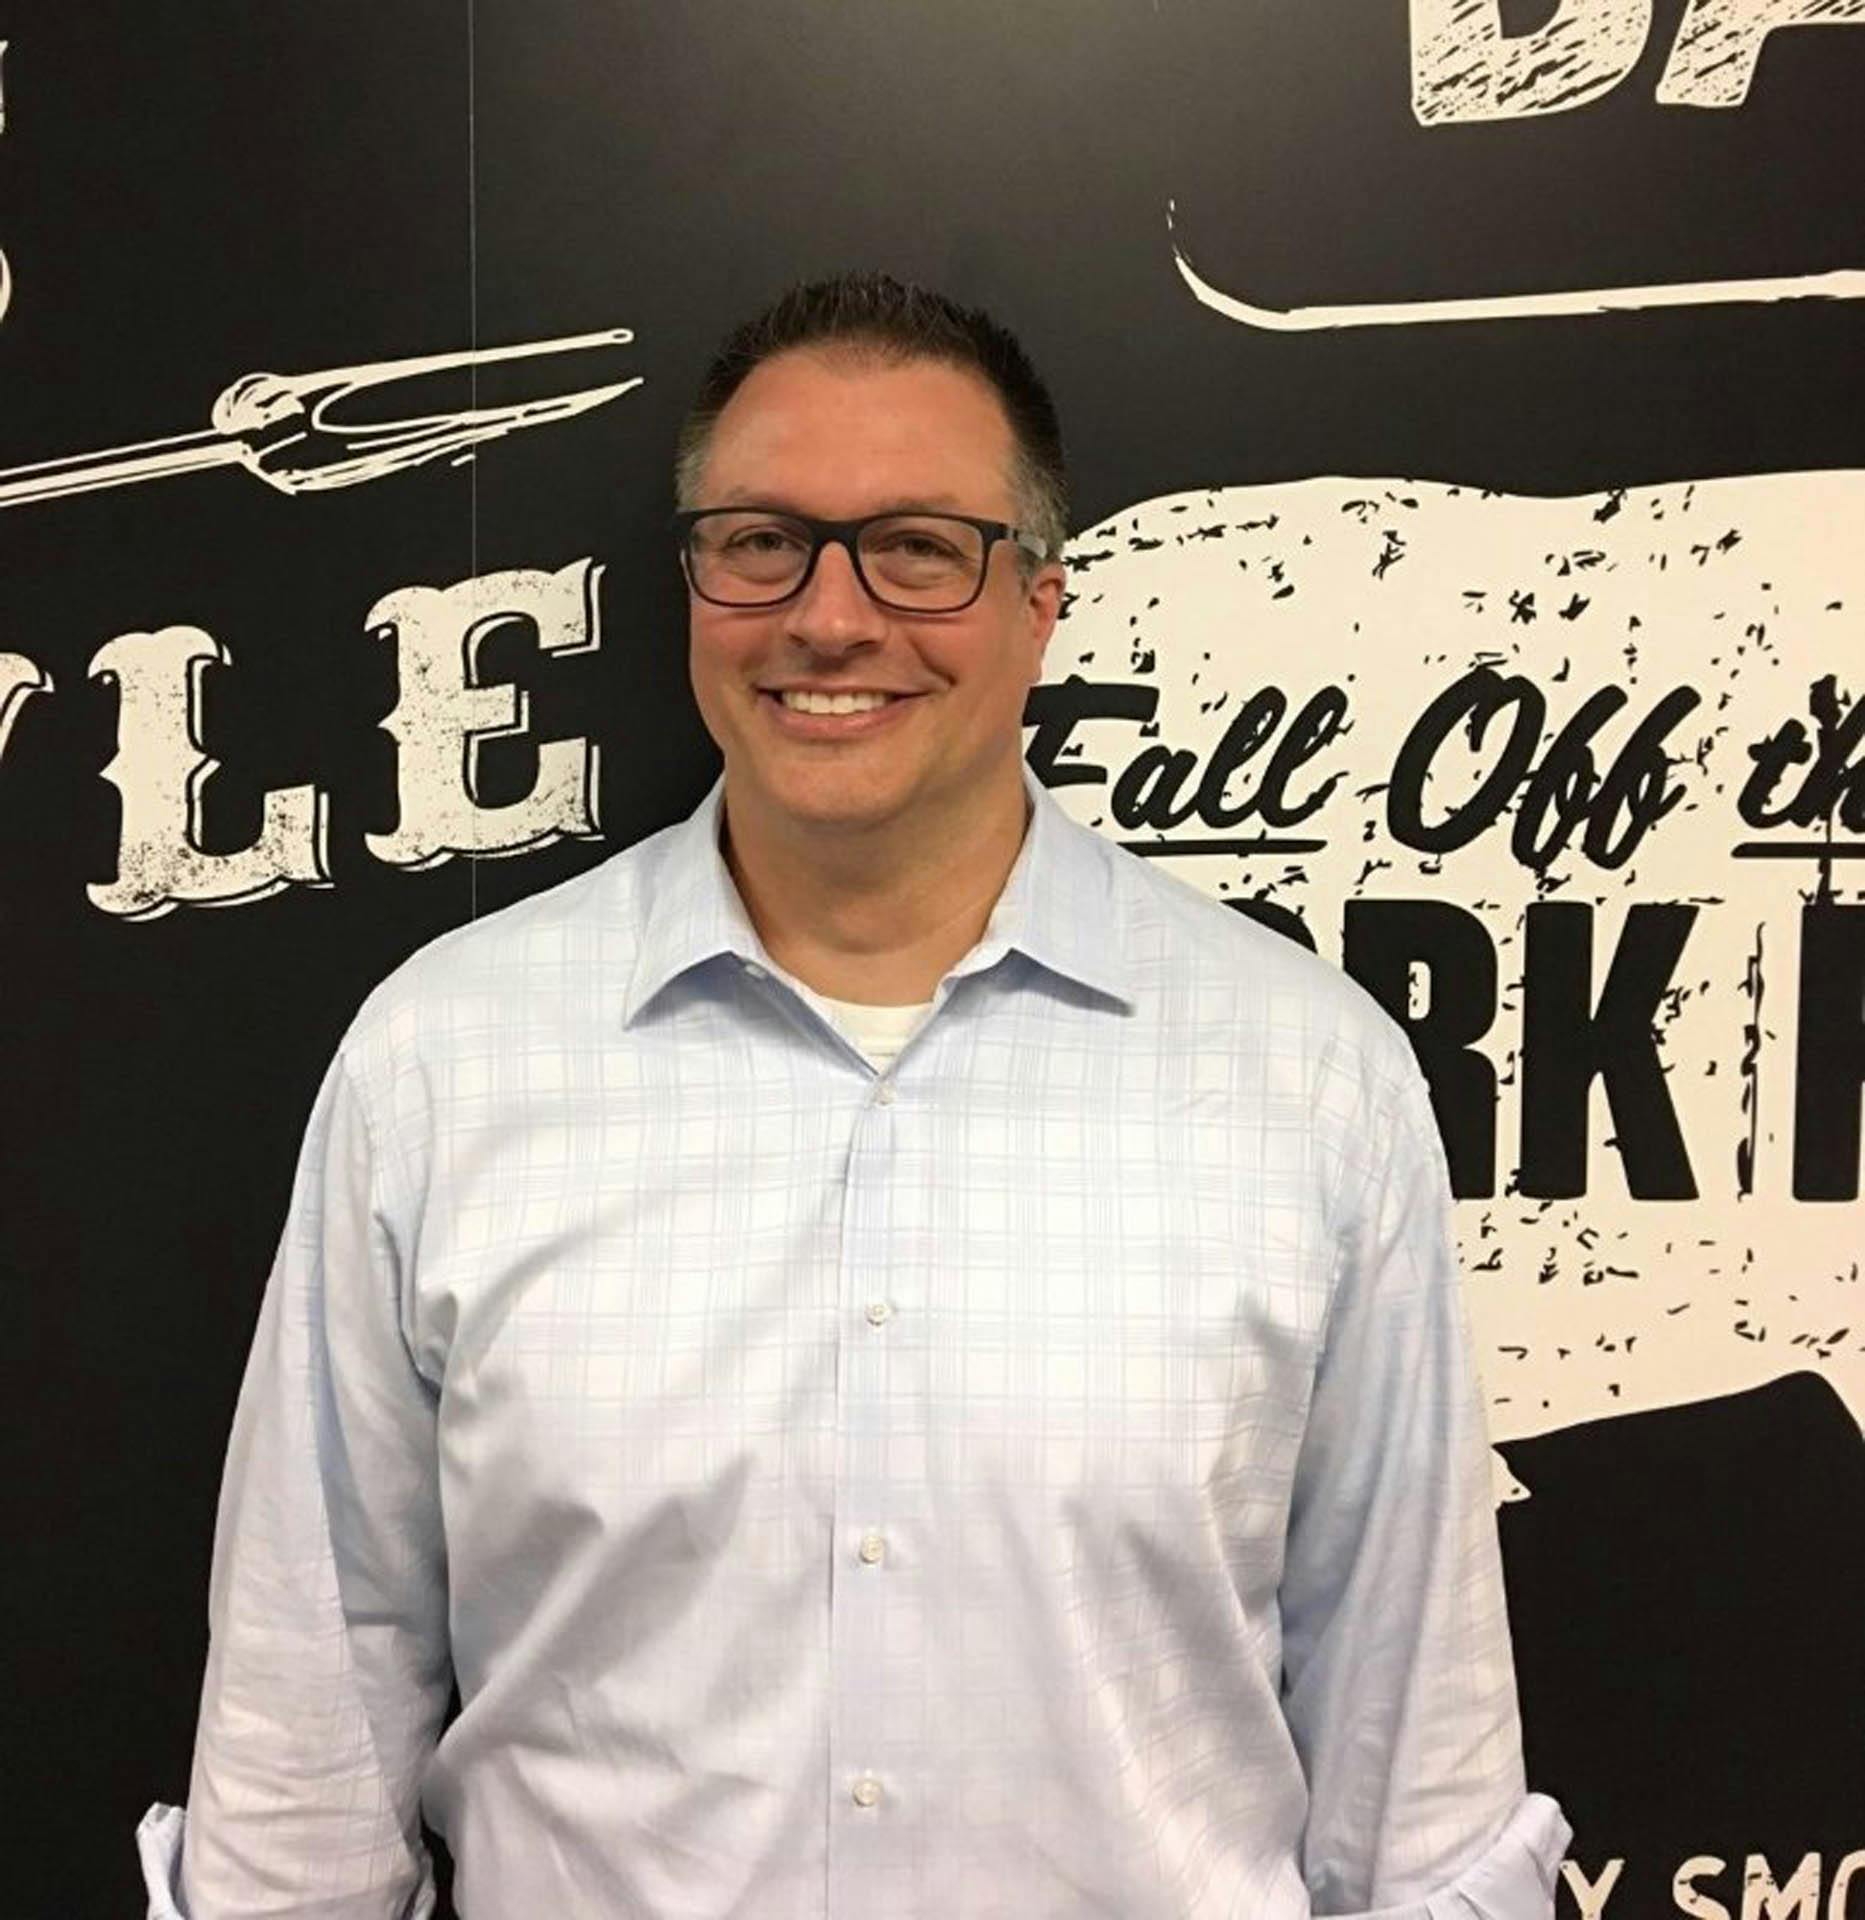 Fast Casual:  Dickey's hires VP of Construction